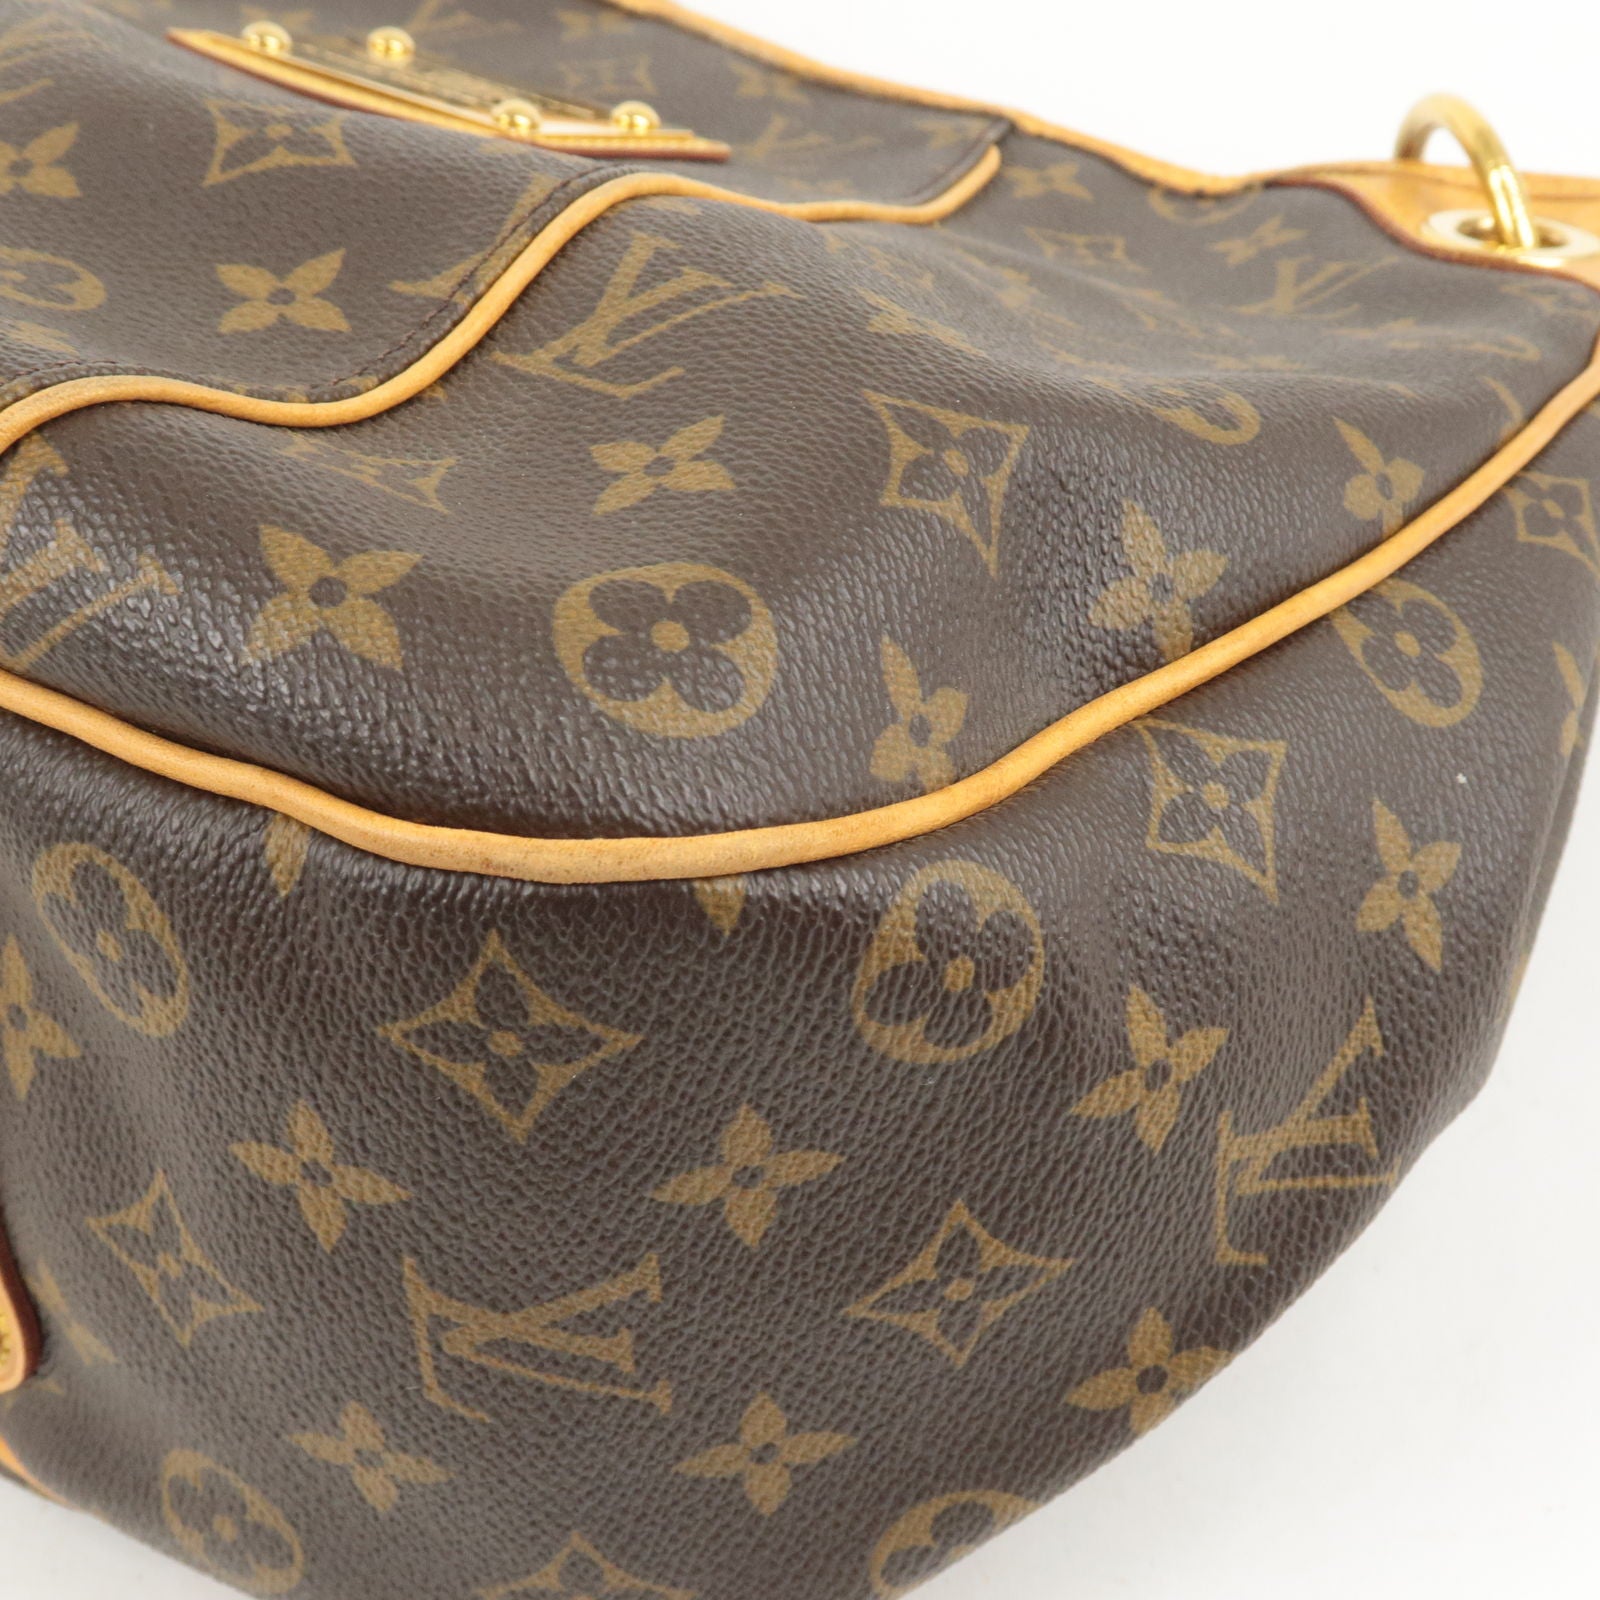 Louis Vuitton, Bags, Galleria Pm Still In Good Used Condition